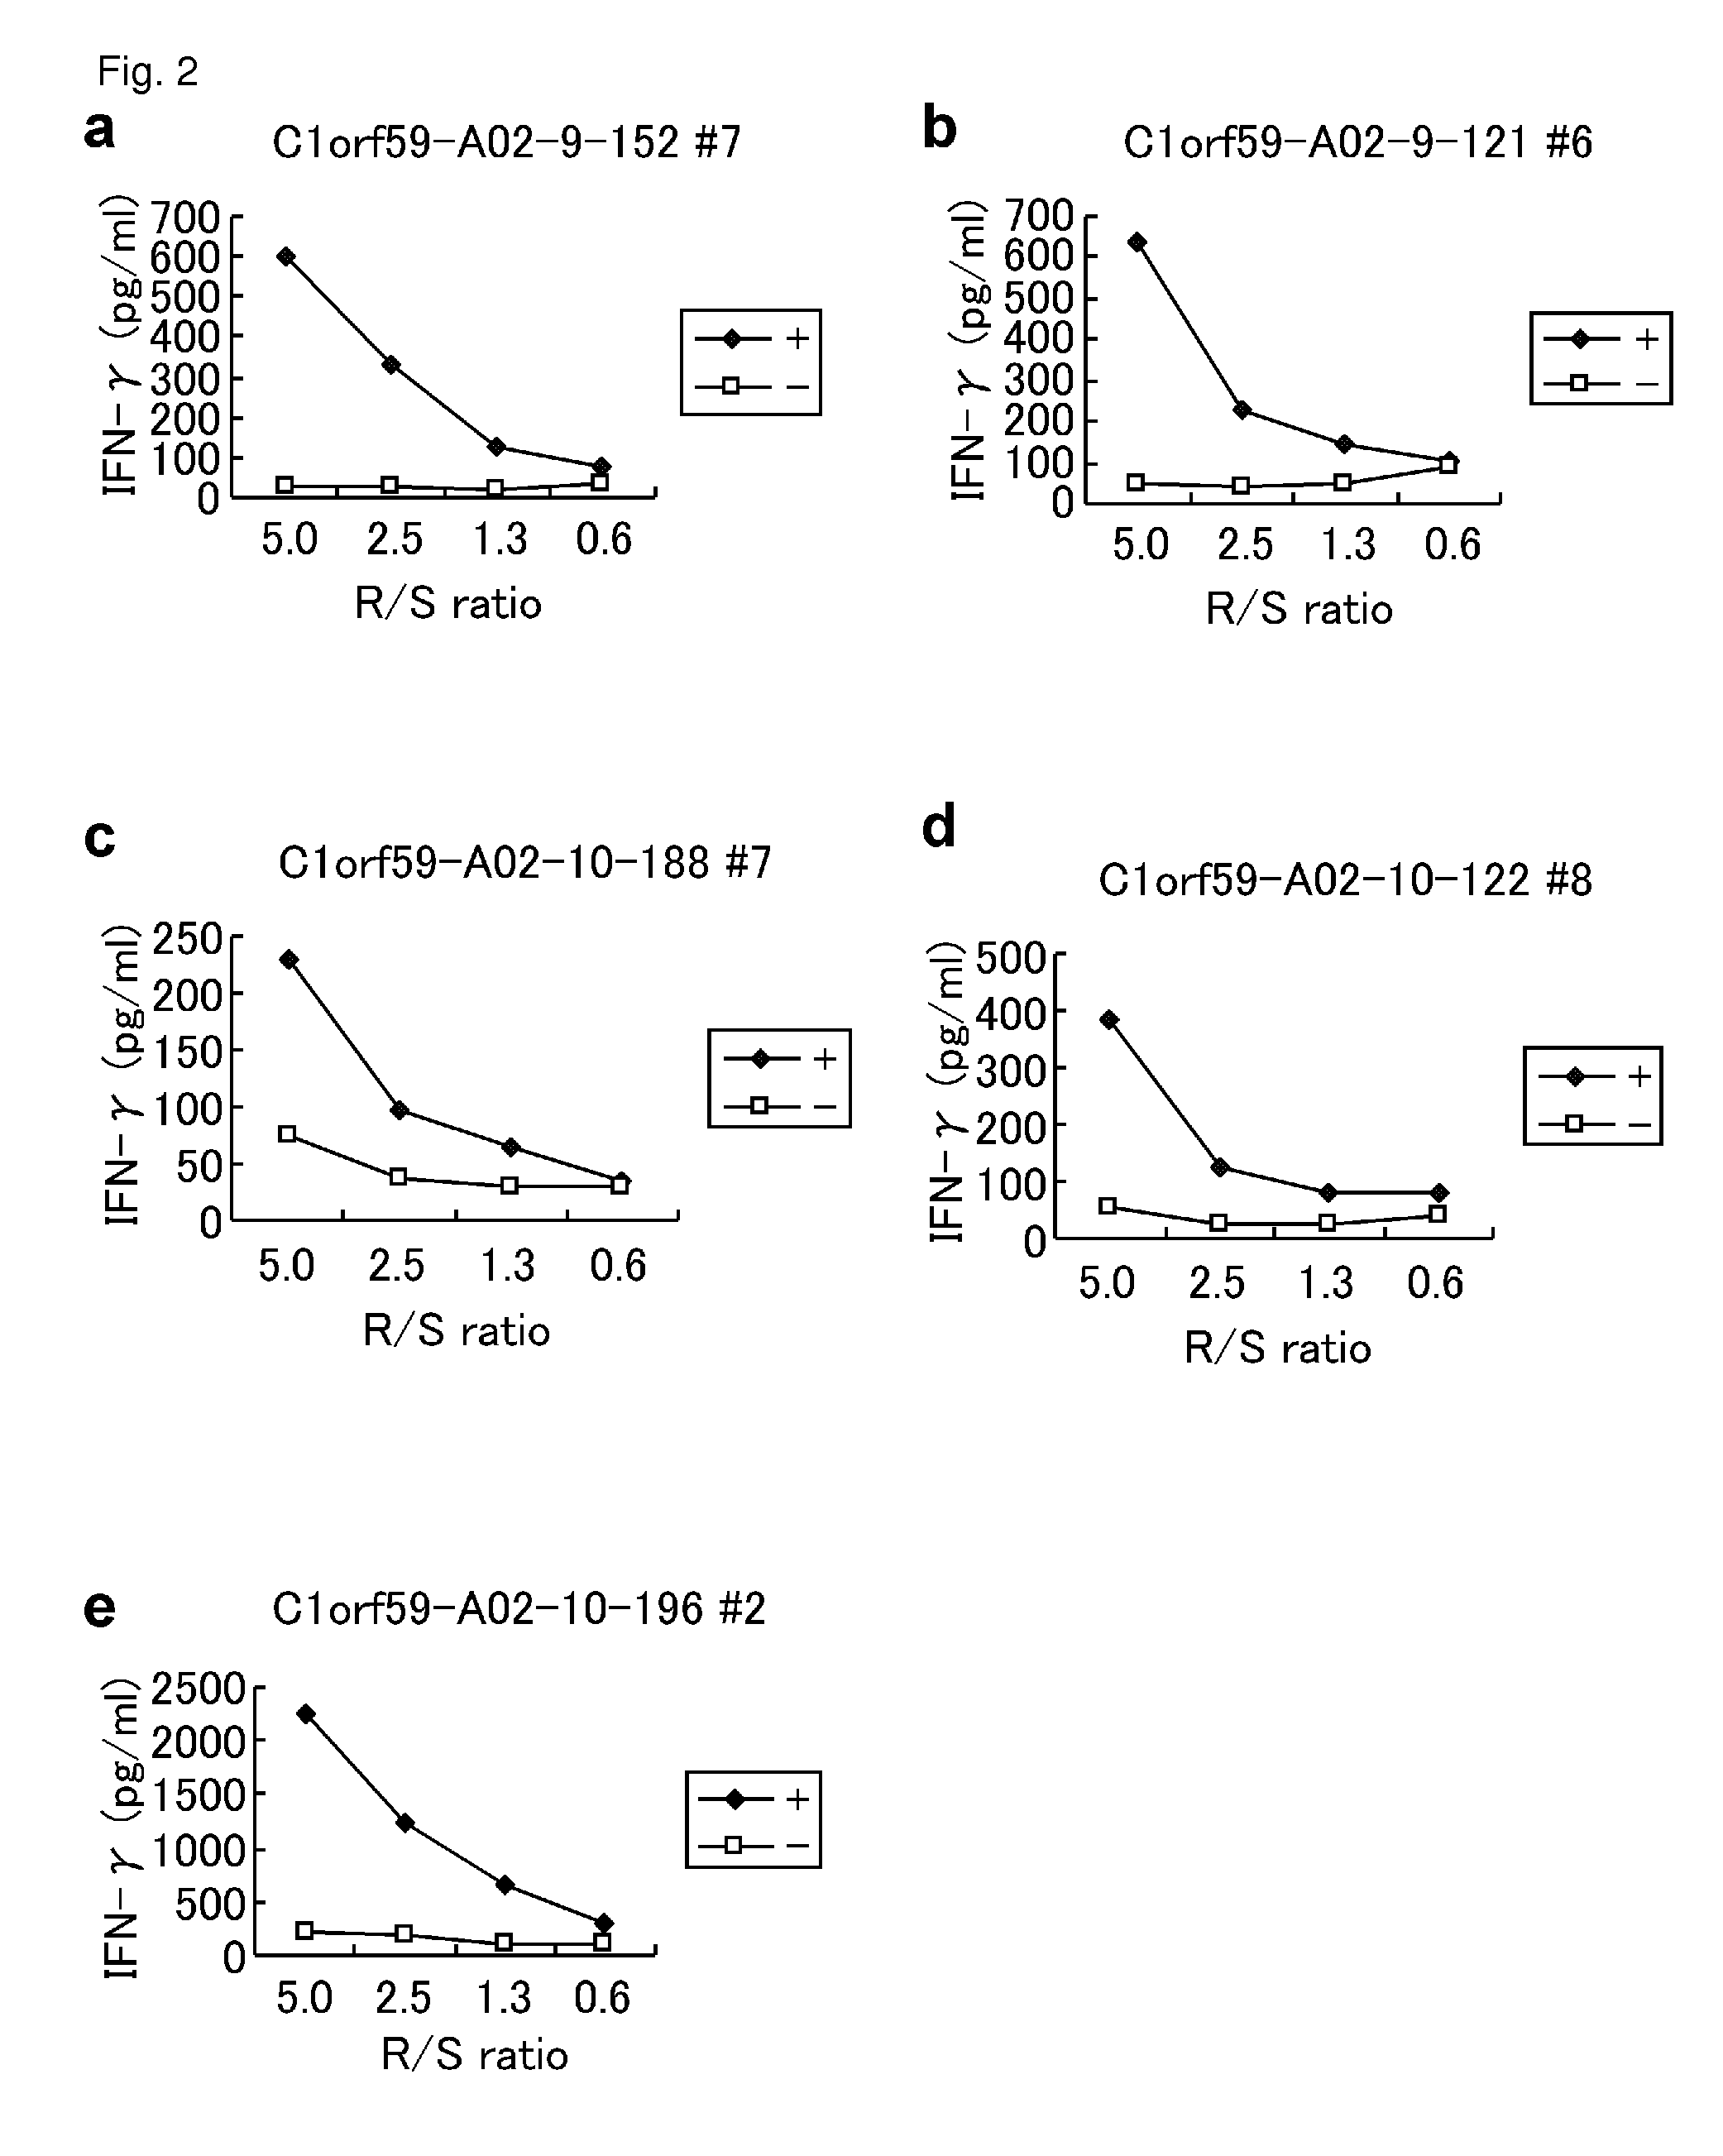 C1ORF59 peptides and vaccines including the same